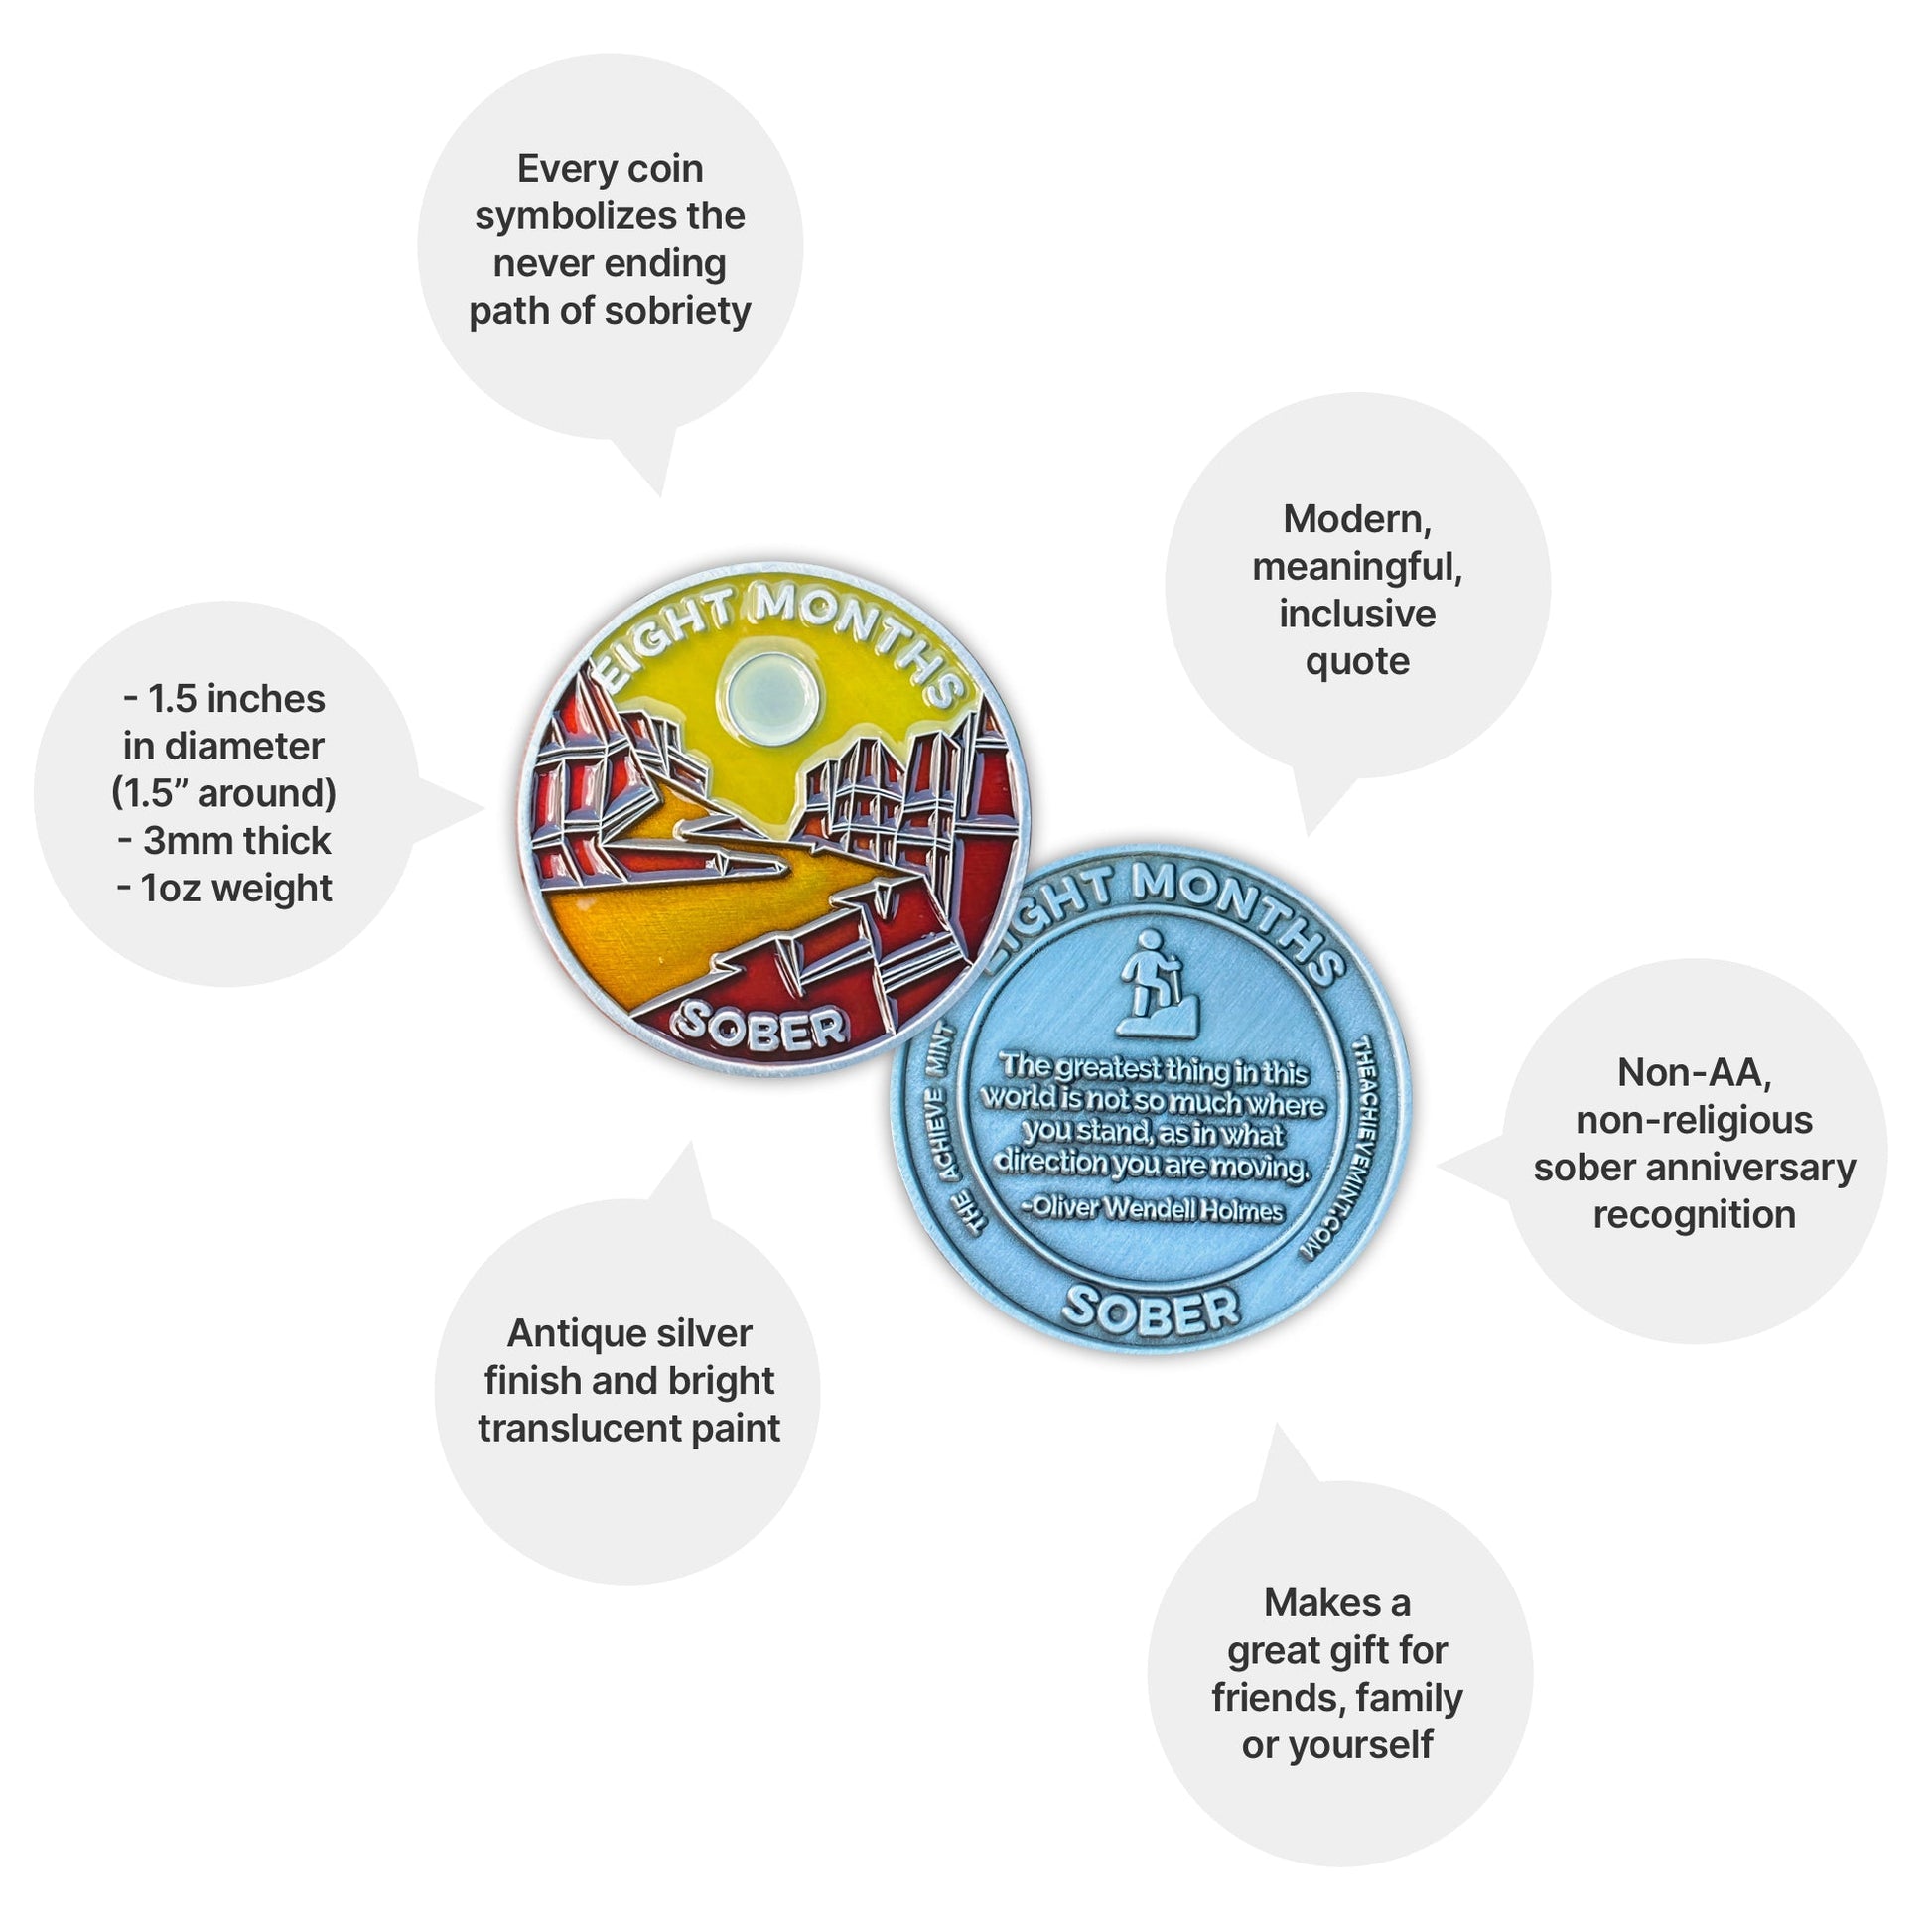 Eight Months Sober sobriety coin - The Achieve Mint